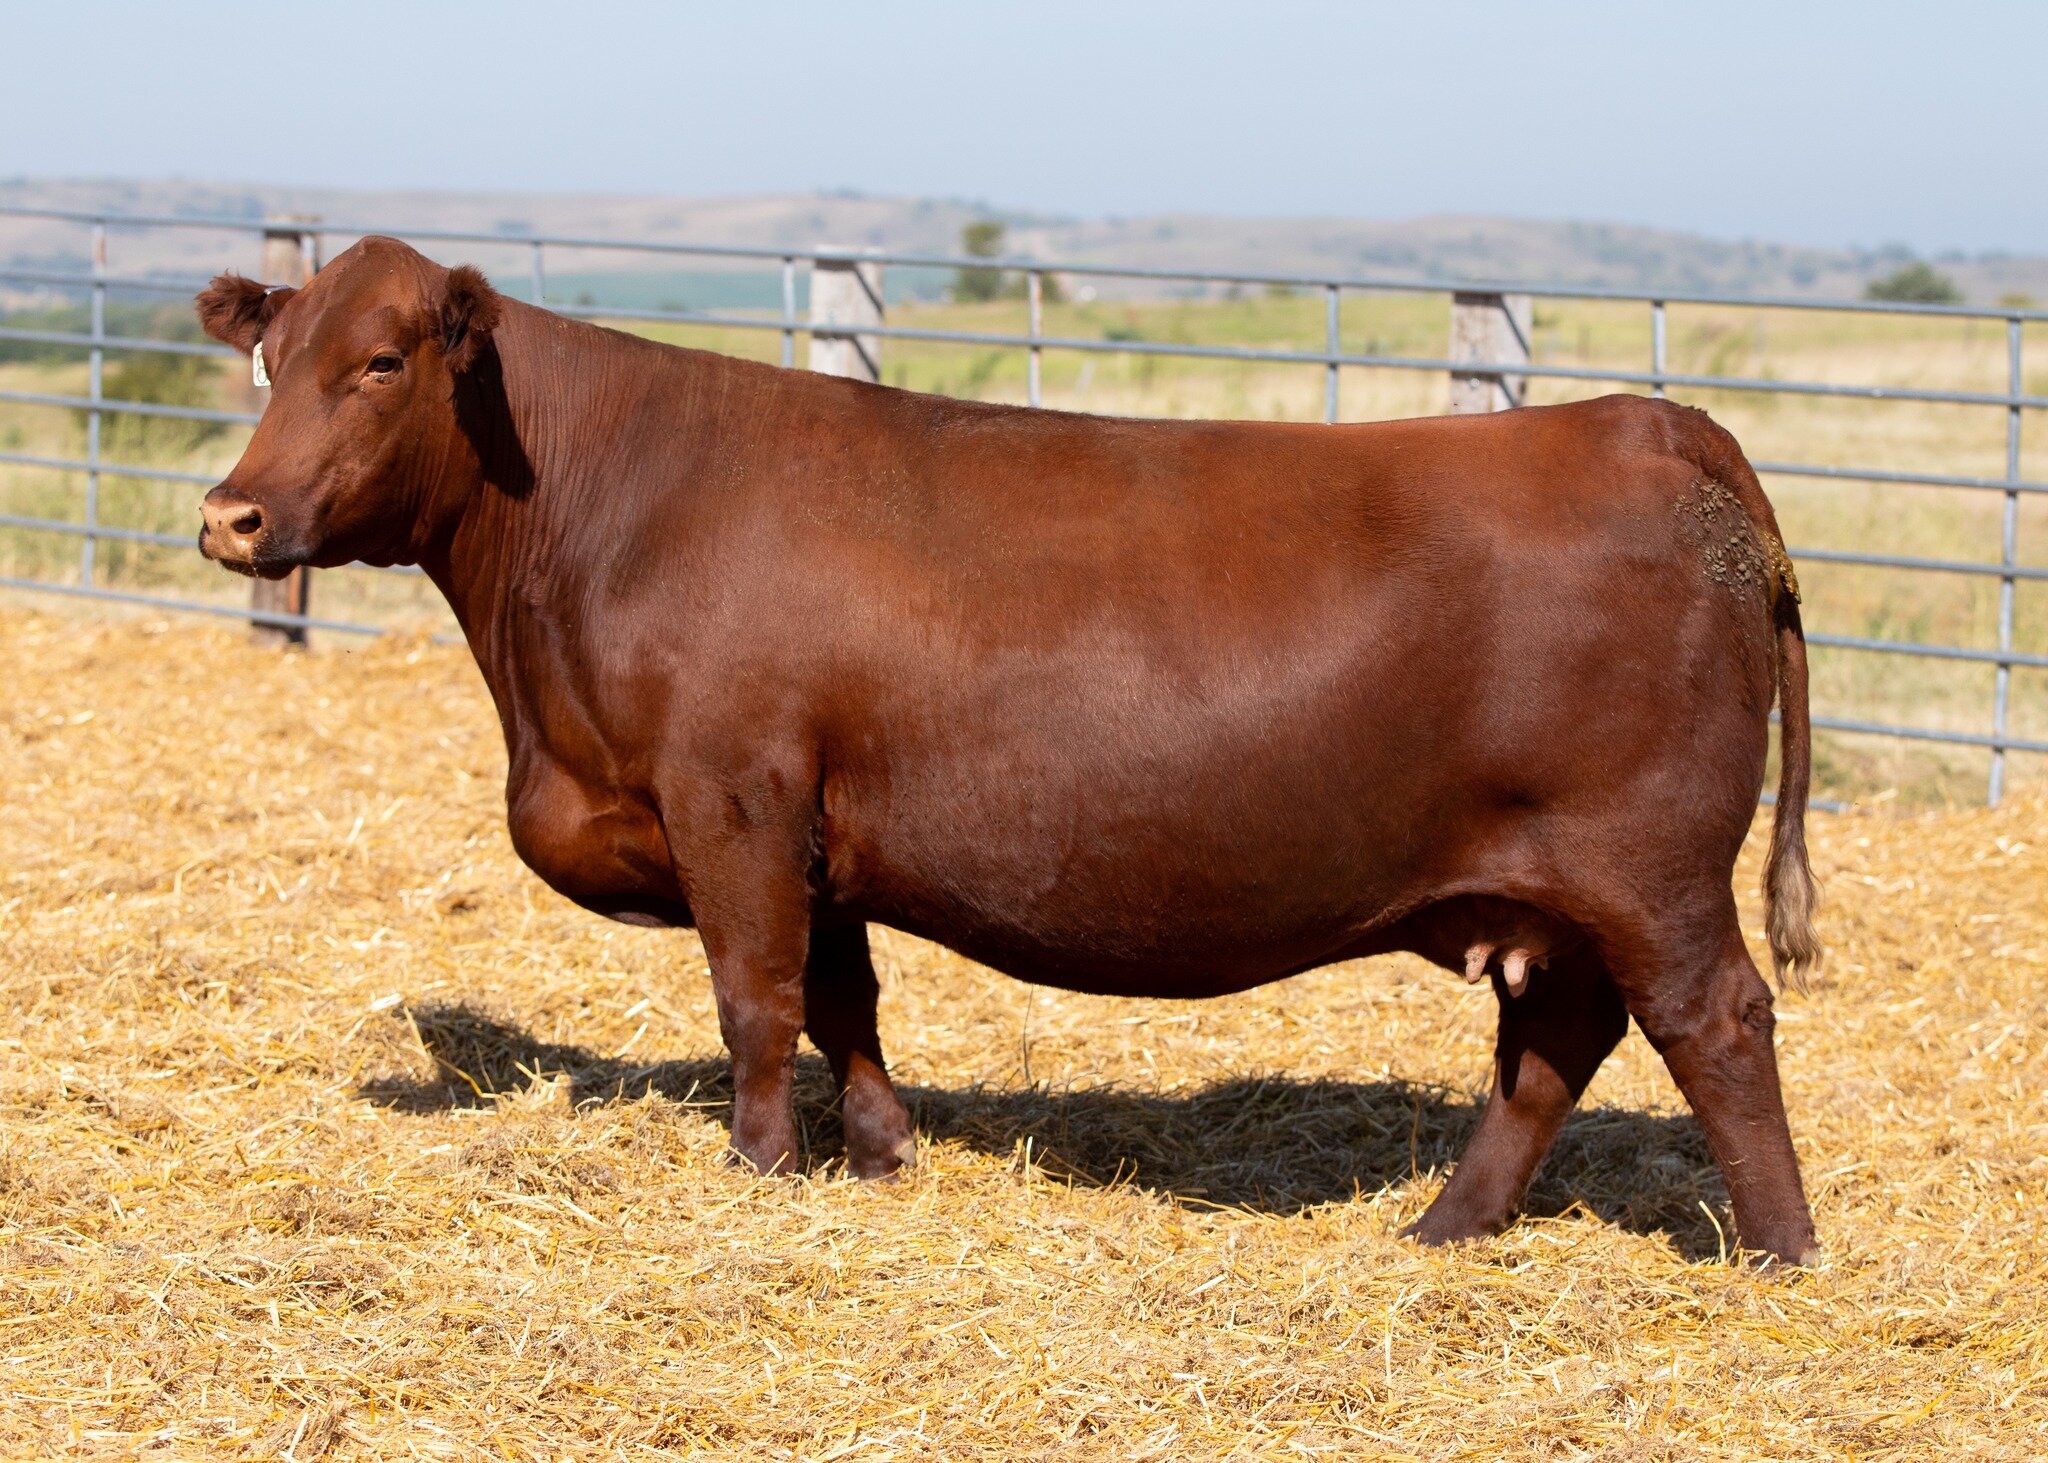 UPCOMING GENETICS FOR DRY CREEK RANCH!!

We purchased NIO Hobo 8050 from Niobrara Red Angus last fall. She has spent the winter being flushed, and we will be putting our first set of embryos in out of her this spring! We bought her with a heifer calf